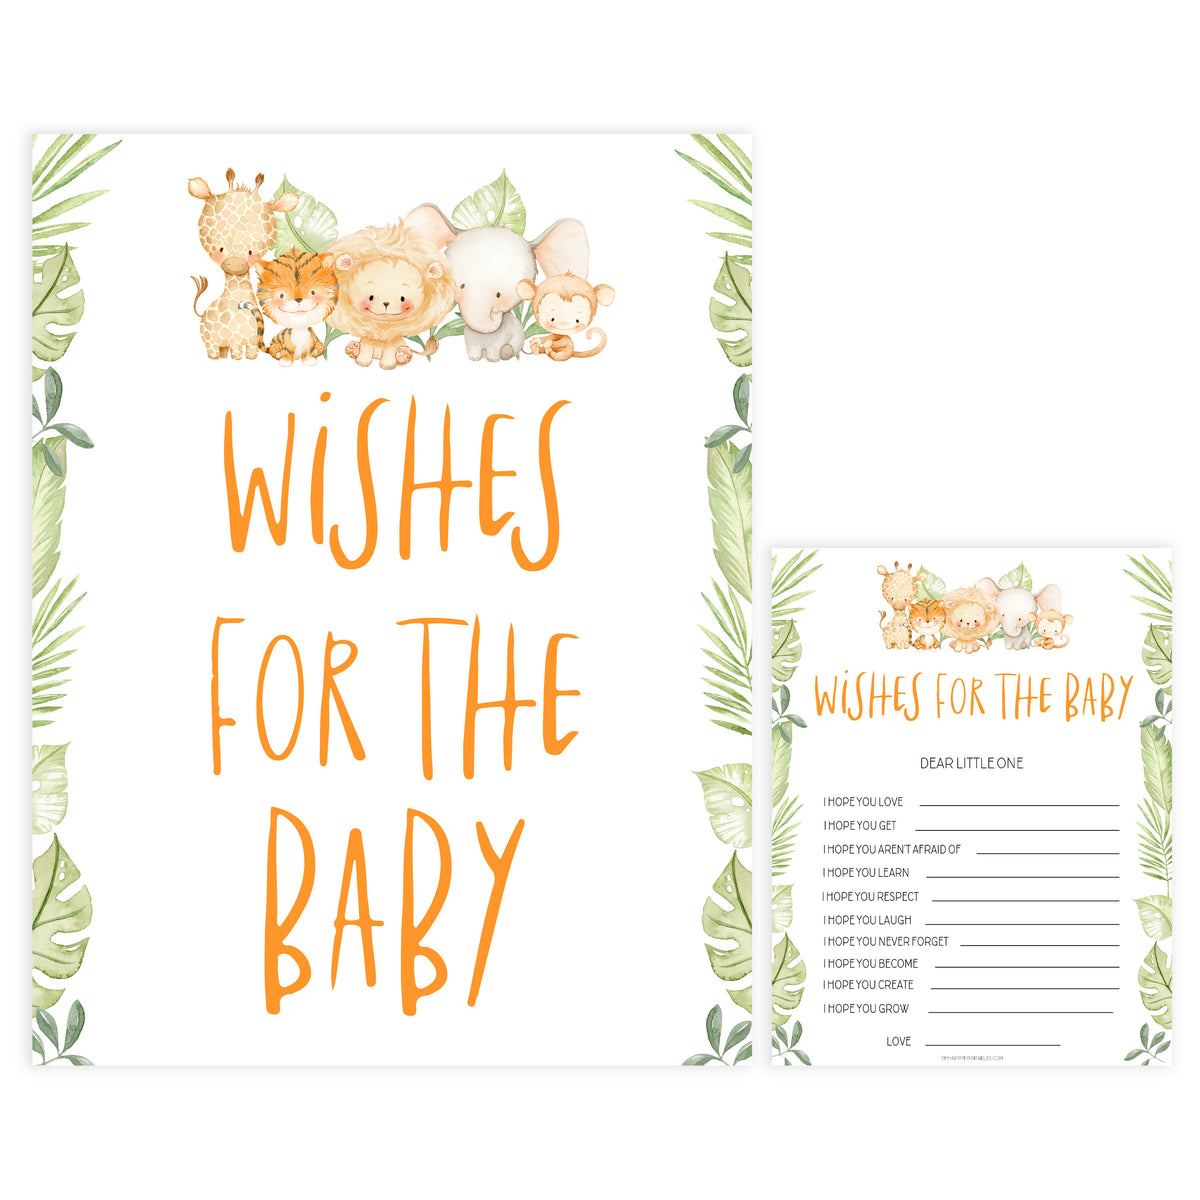 wishes for the baby game, Printable baby shower games, safari animals baby games, baby shower games, fun baby shower ideas, top baby shower ideas, safari animals baby shower, baby shower games, fun baby shower ideas